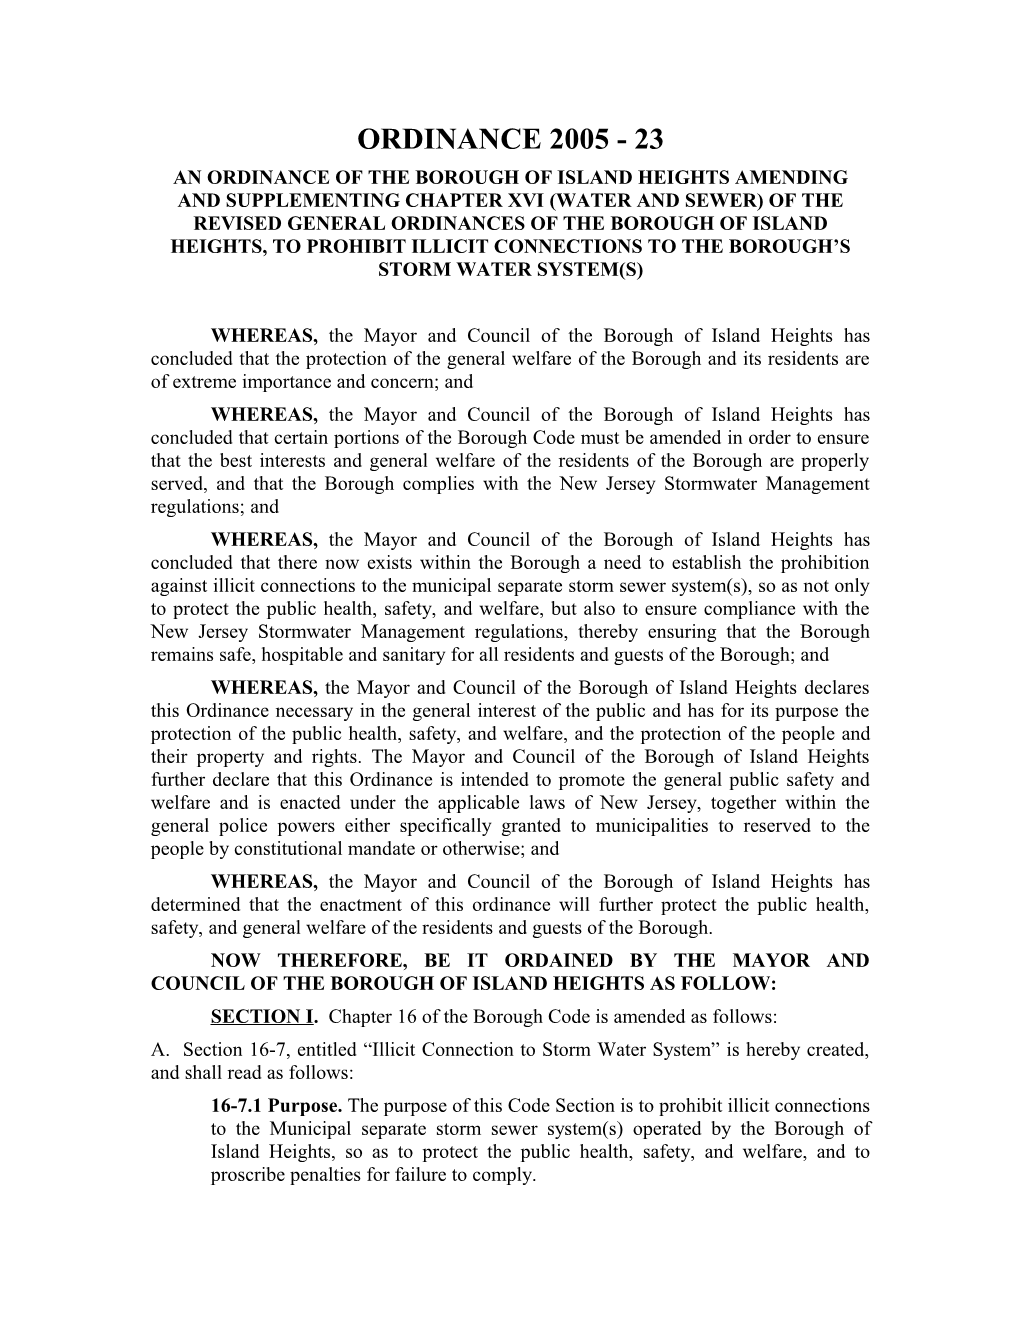 An Ordinance of the Borough of Island Heights Amending and Supplementing Chapter Xvi (Water